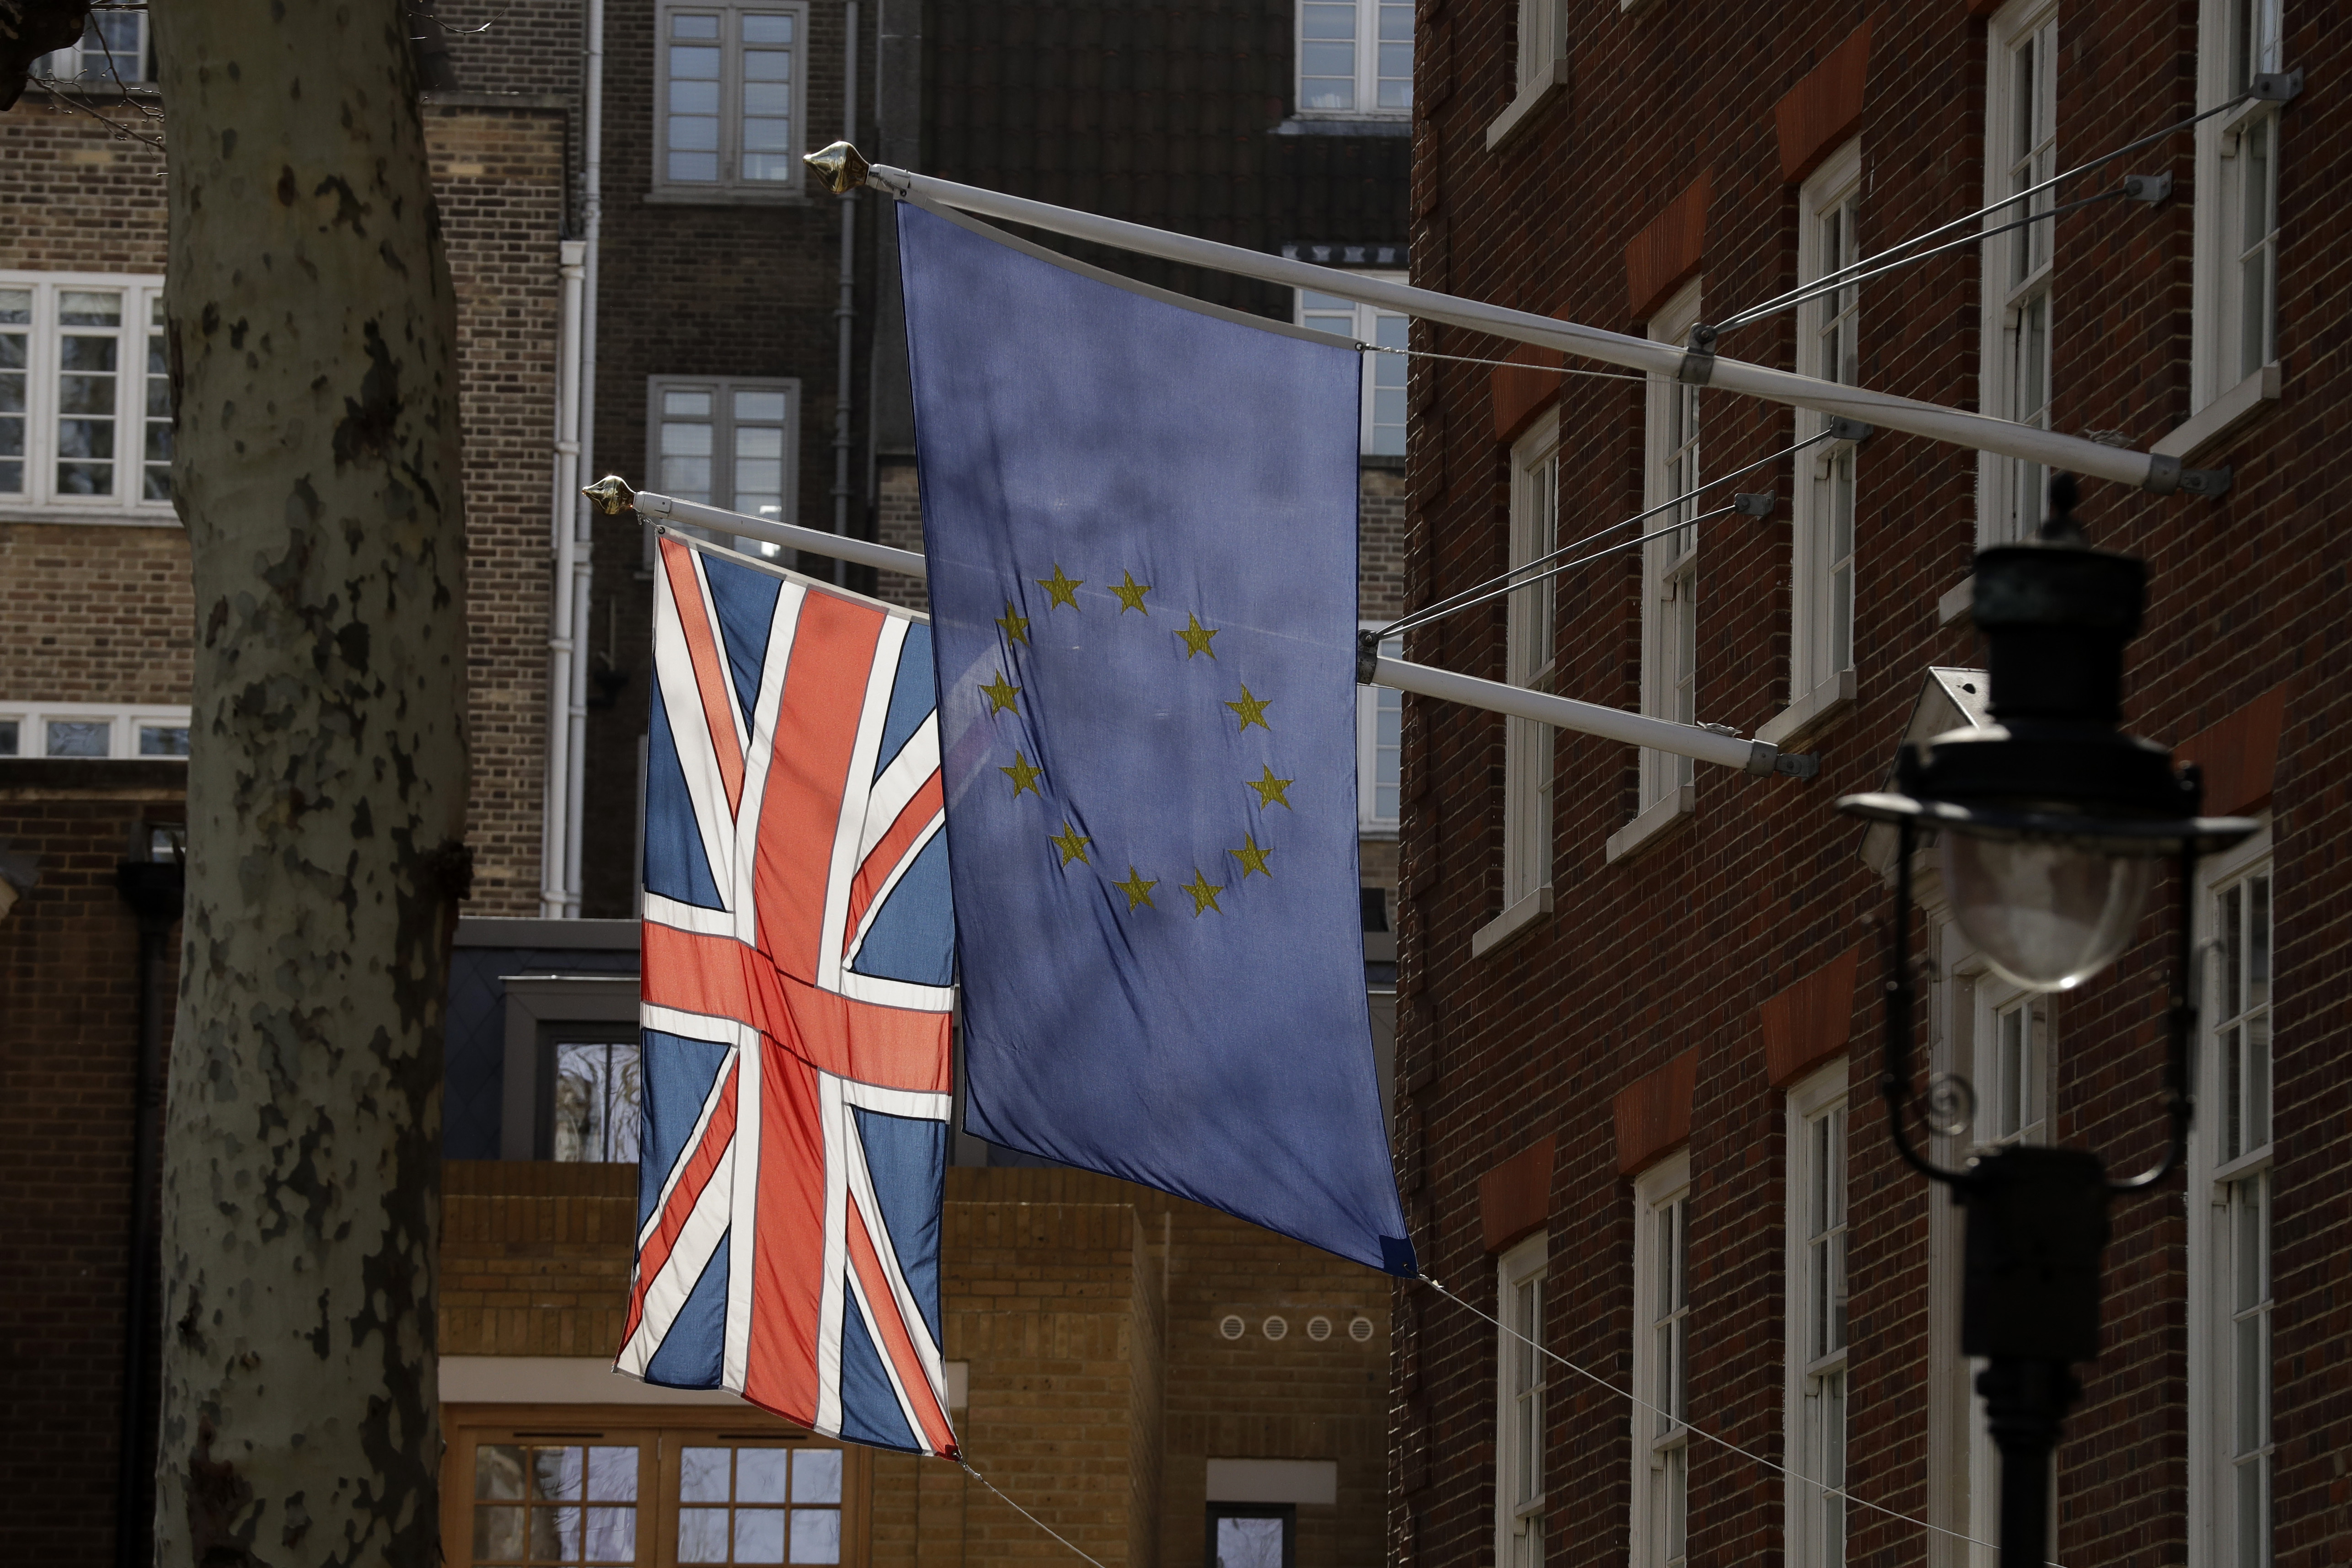 A European flag and a British Union flag hang outside Europe House, the European Parliament's British offices in London, Monday, March 18, 2019. British Prime Minister Theresa May was making a last-minute push Monday to win support for her European Union divorce deal, warning opponents that failure to approve it would mean a long — and possibly indefinite — delay to Brexit. Parliament has rejected the agreement twice, but May aims to try a third time this week if she can persuade enough lawmakers to change their minds. (AP Photo/Matt Dunham)